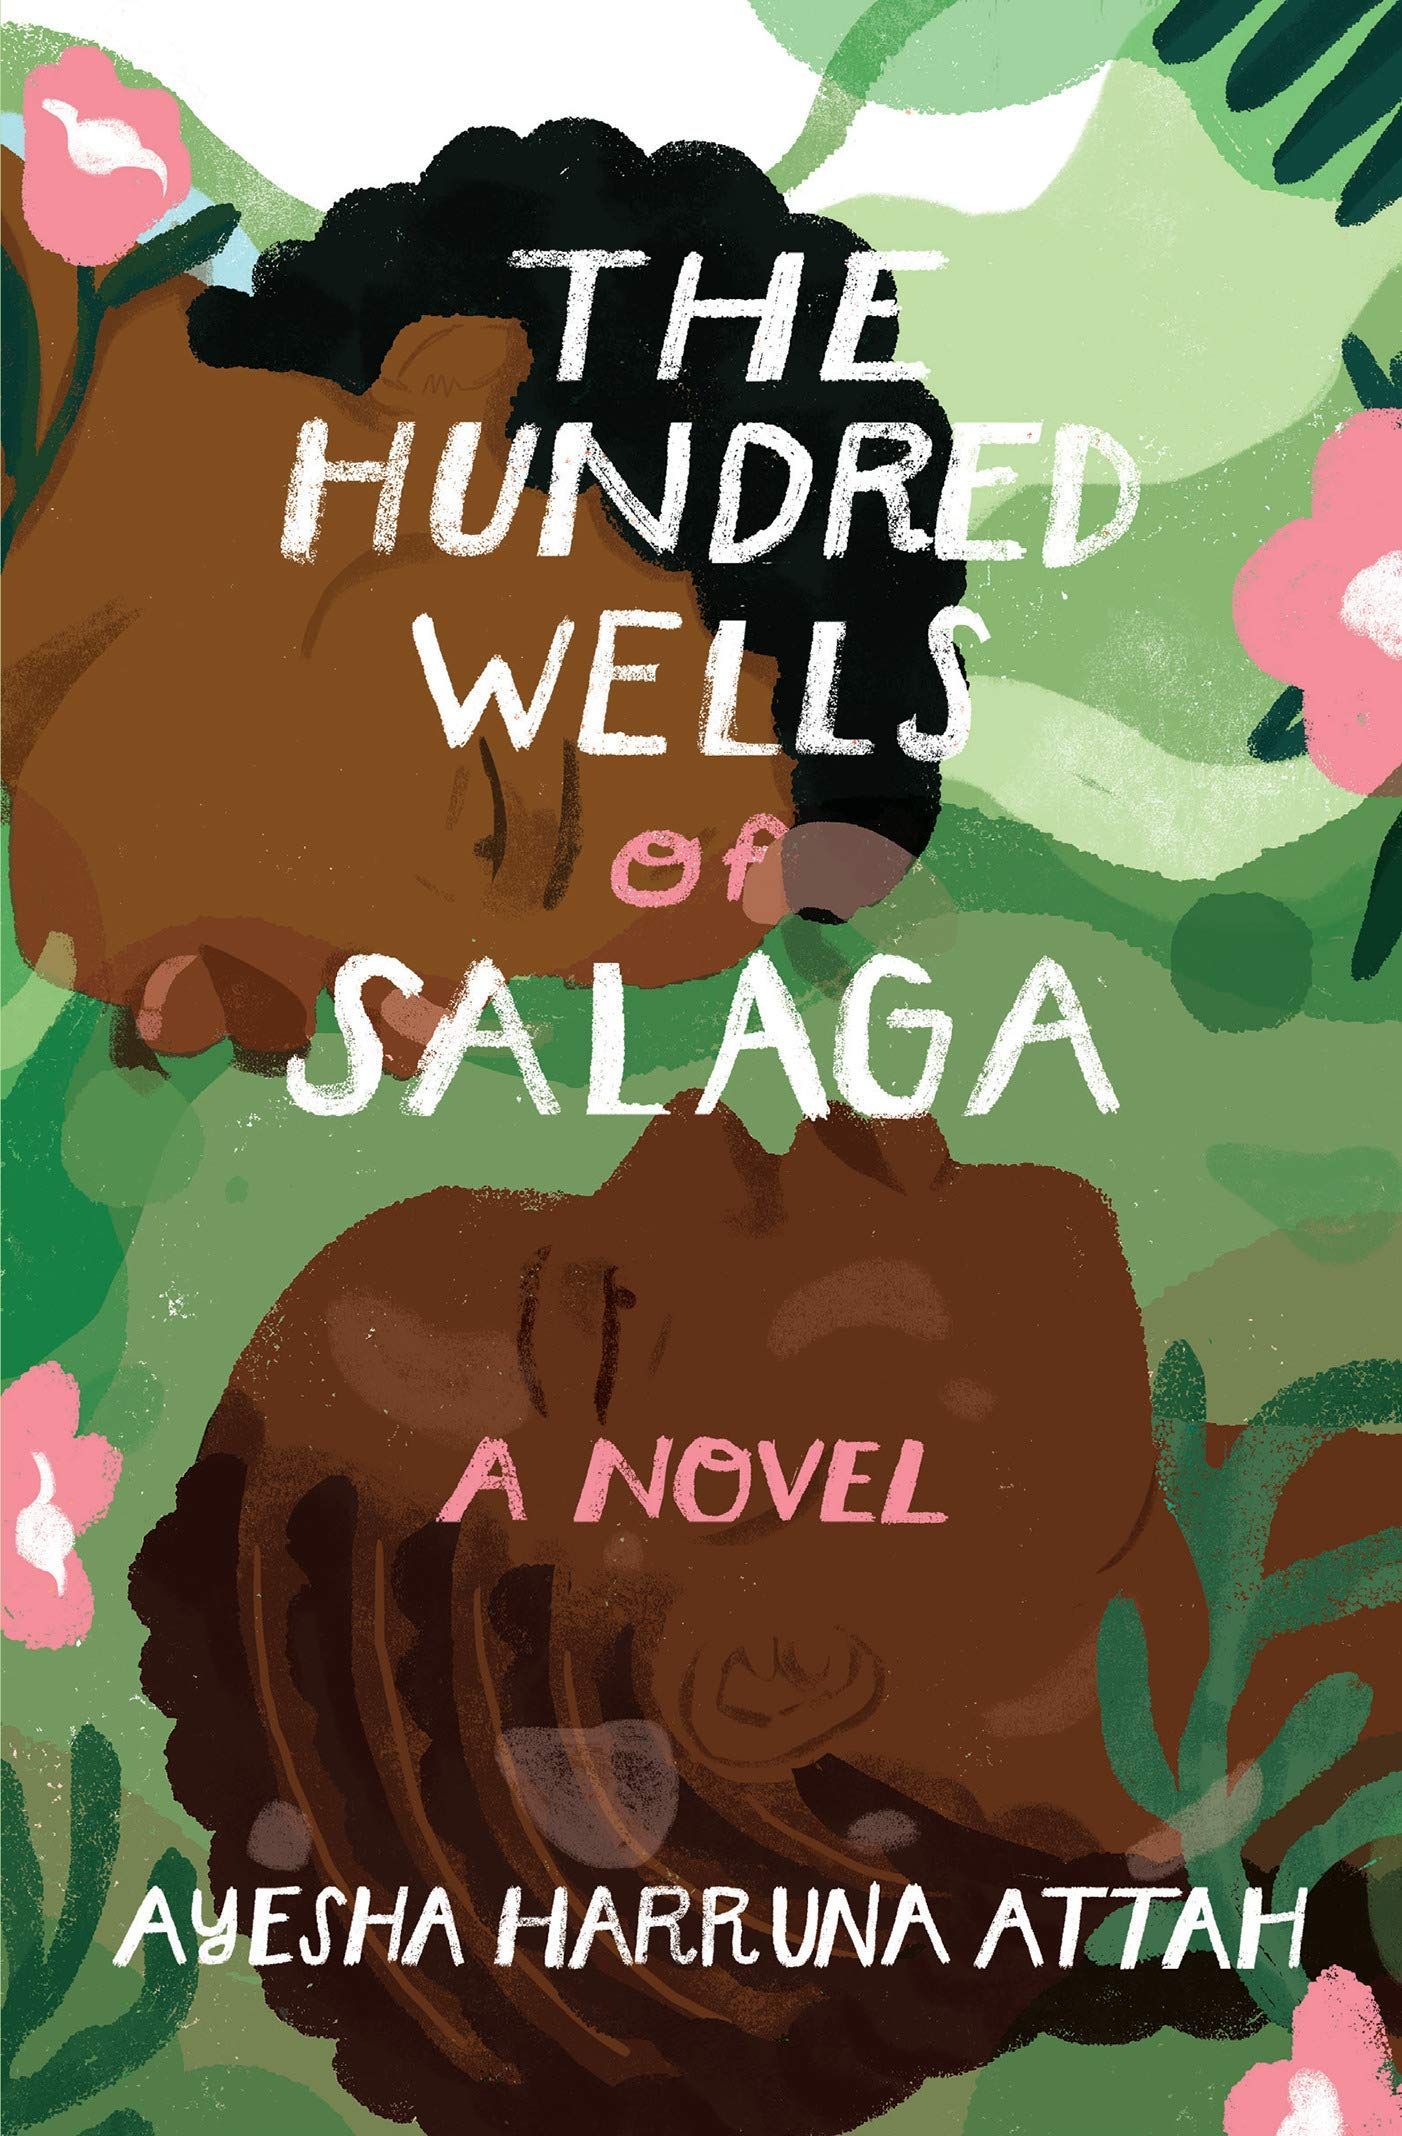 Love in the Time of Slavery: On Ayesha Harruna Attah’s “The Hundred Wells of Salaga”